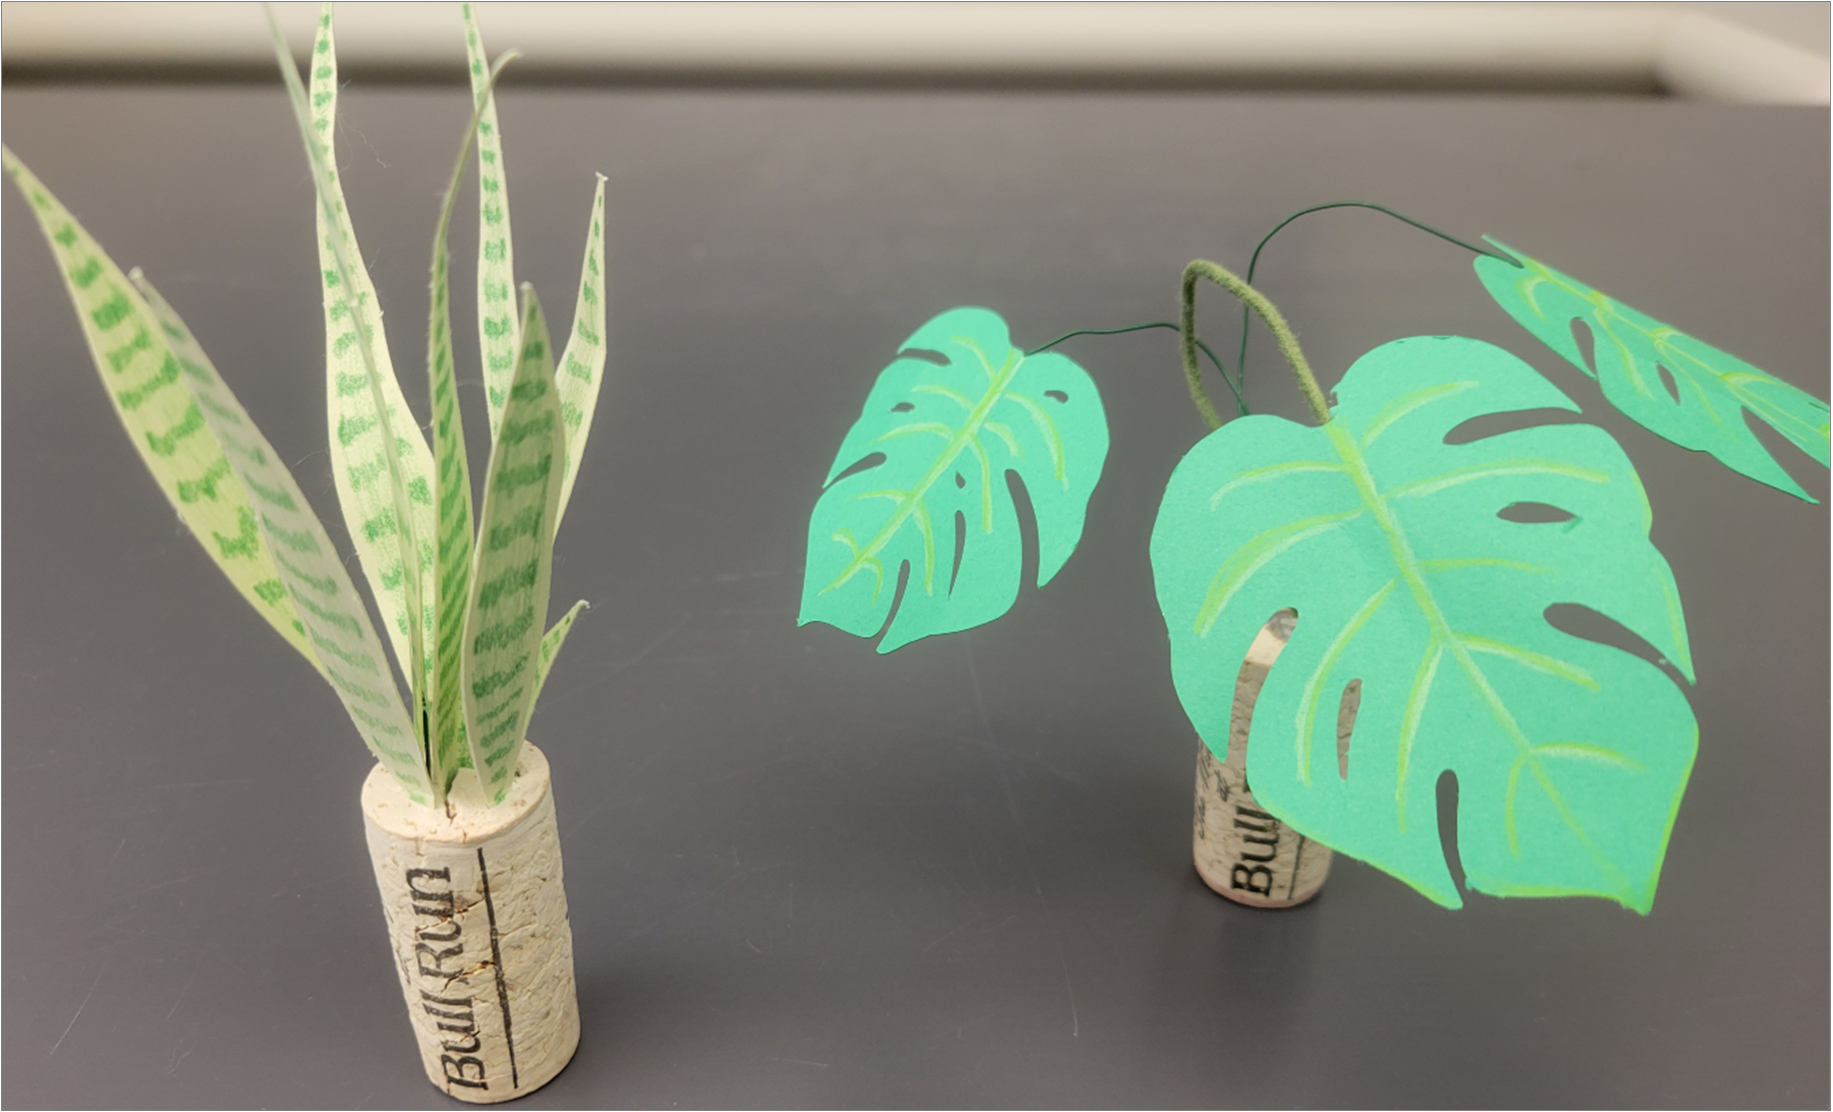 Two plants made out of paper with a cork base. One resembles a snake plant and the other resembles a monstera